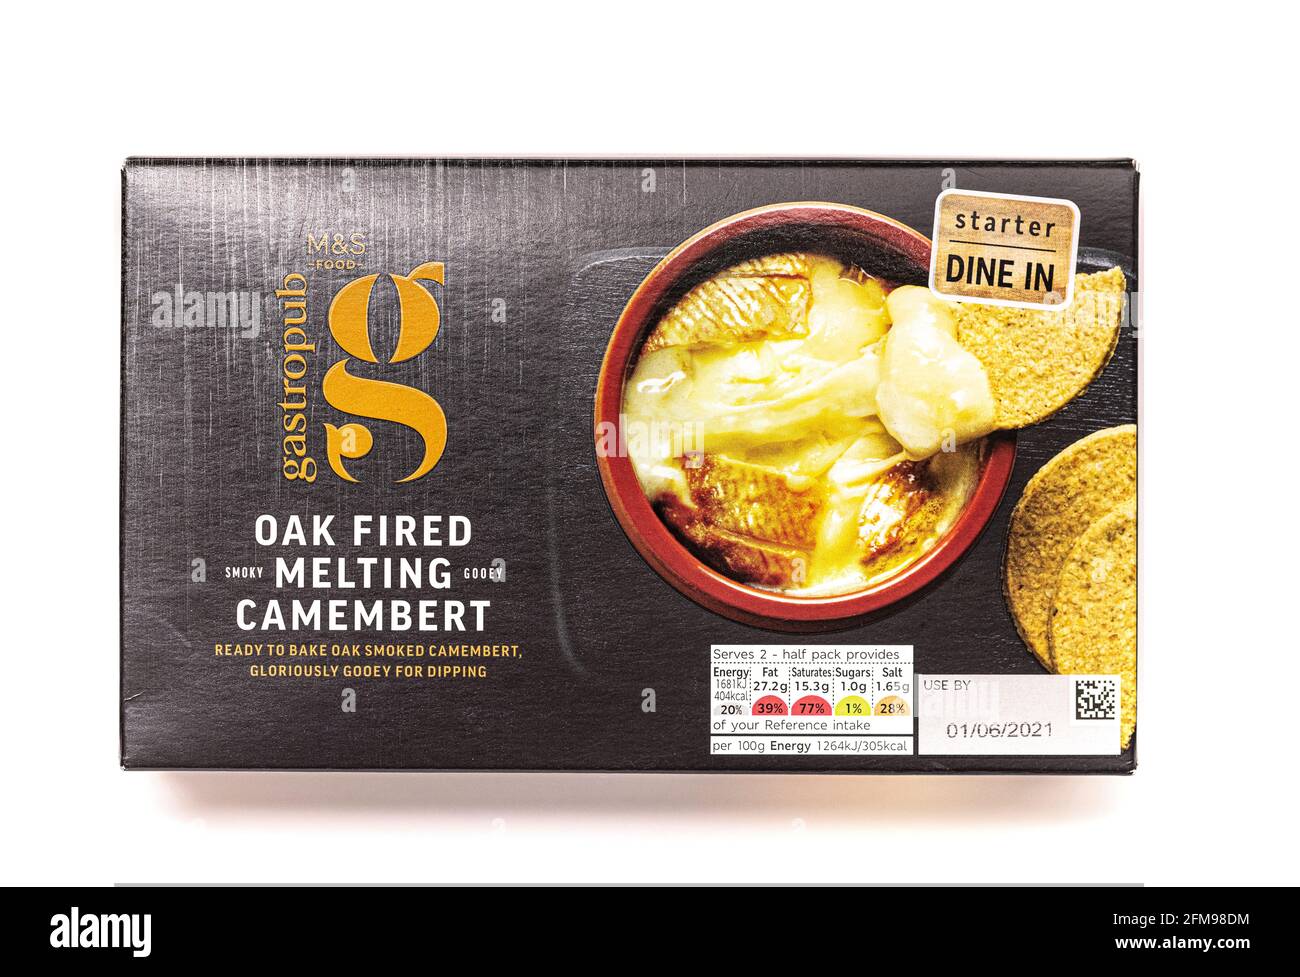 Marks And Spencer Food Gastropub Oak Fired Melting Camembert on a white background Stock Photo